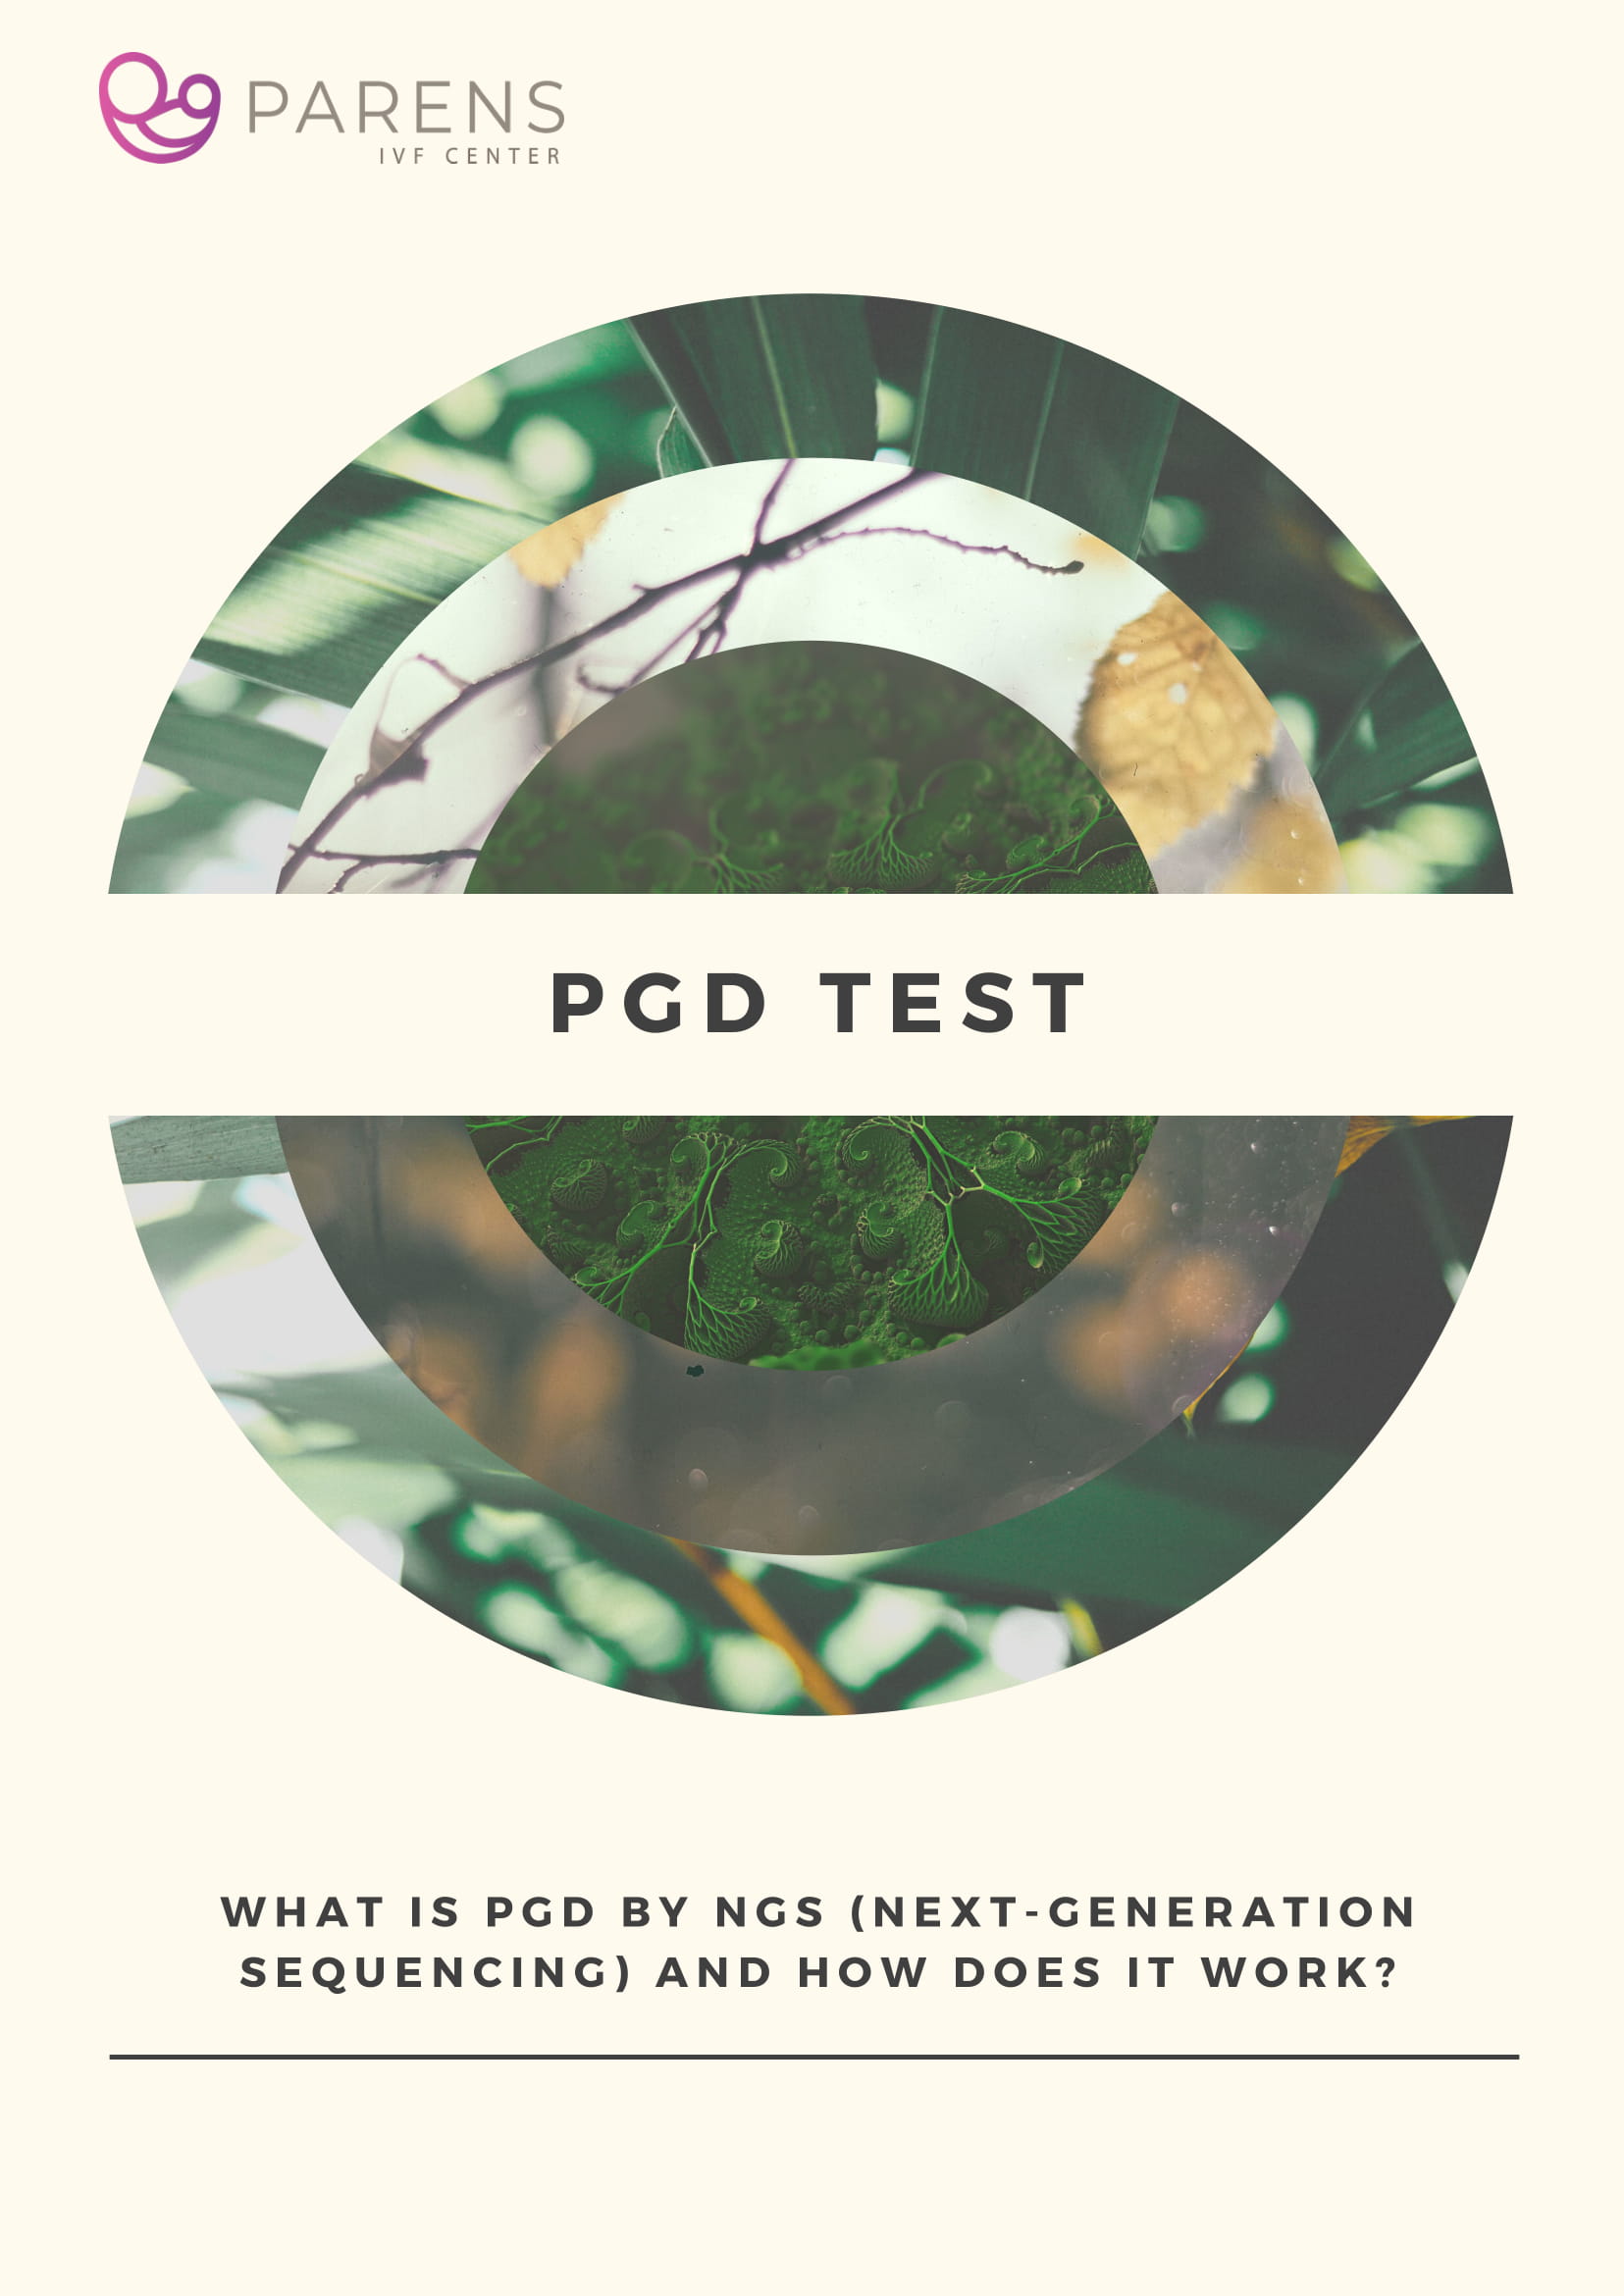 PGD by NGS - PGD test